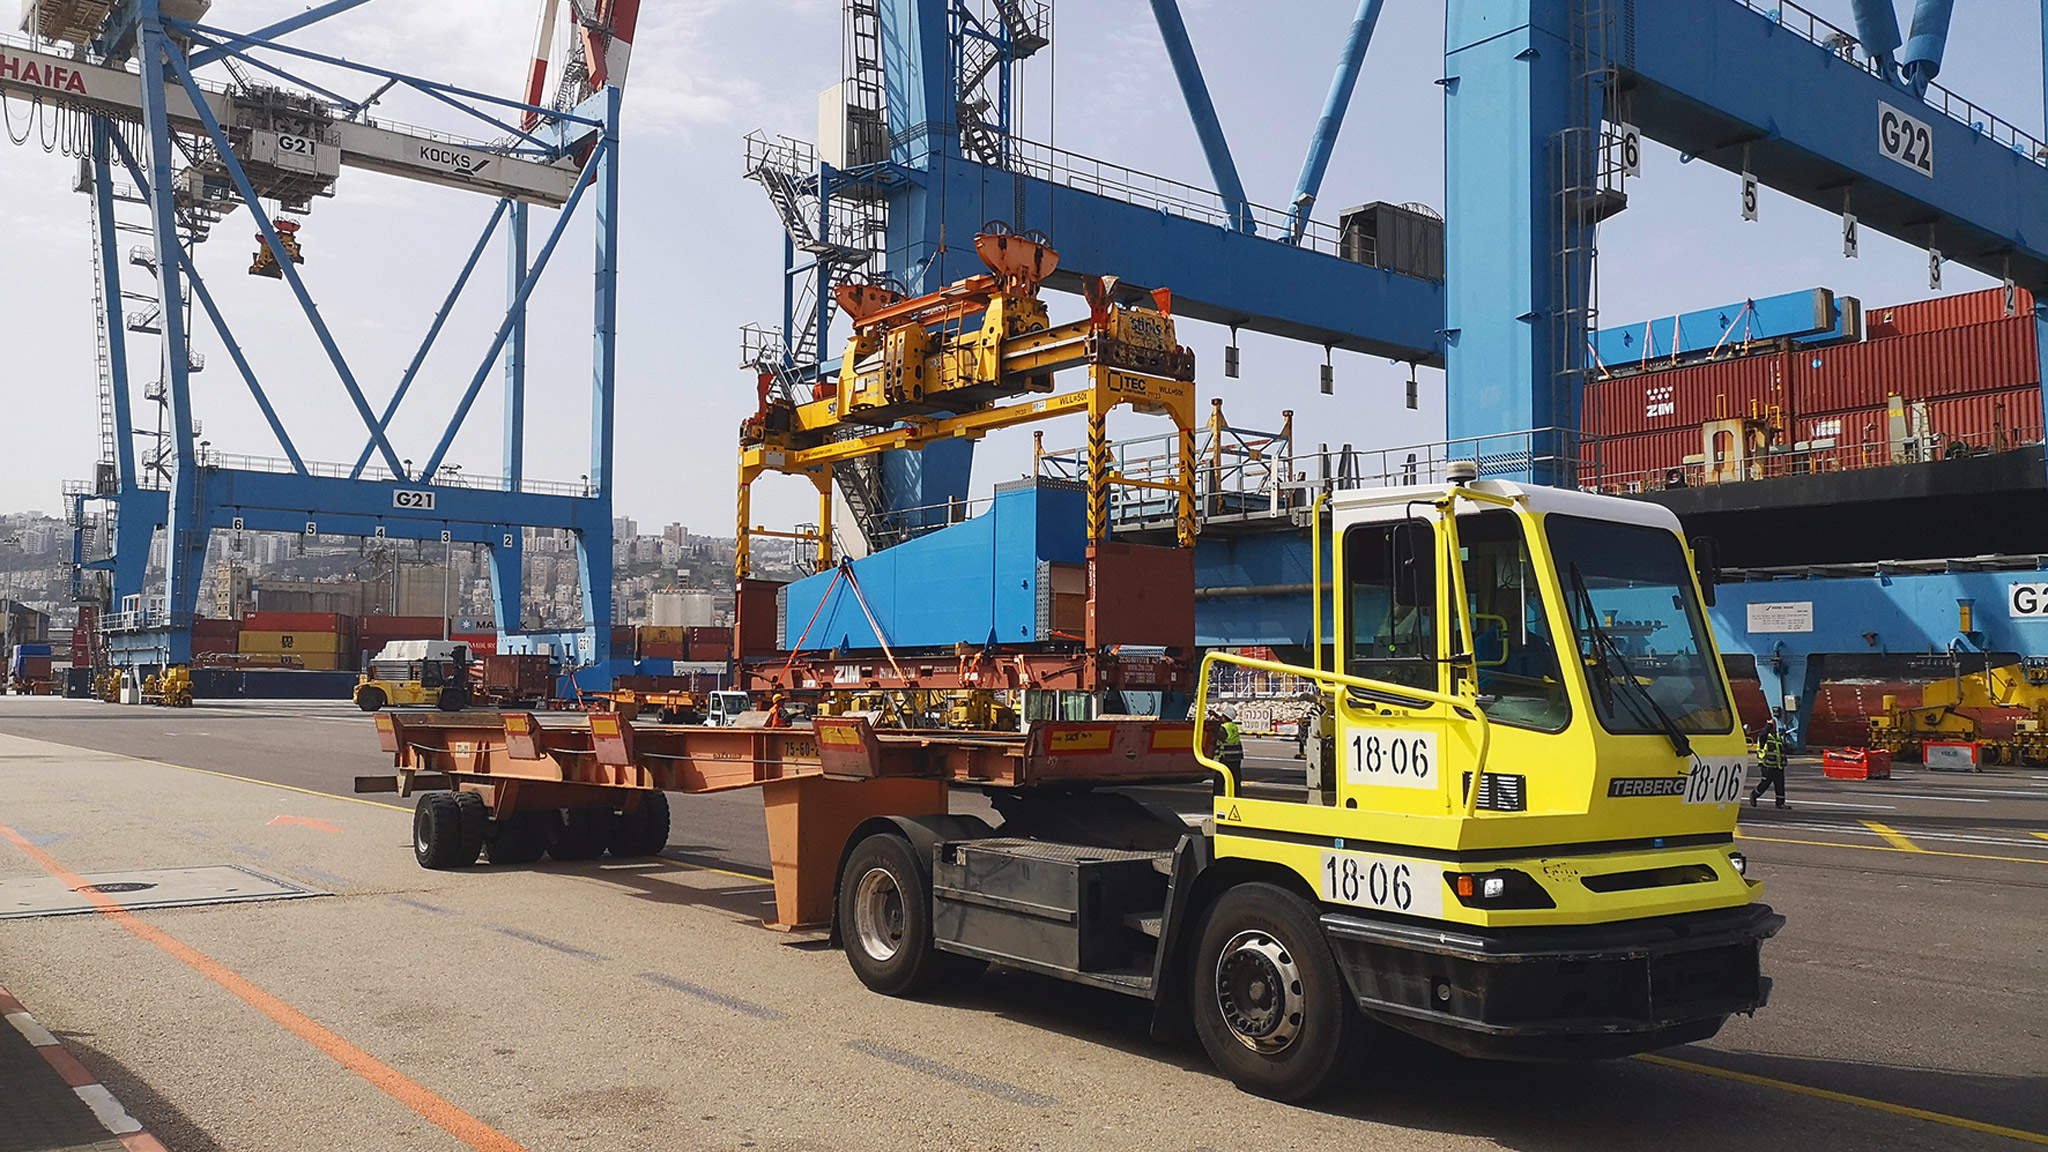 Dachser and ICL unloading theproject cargo at the Port of Haifa